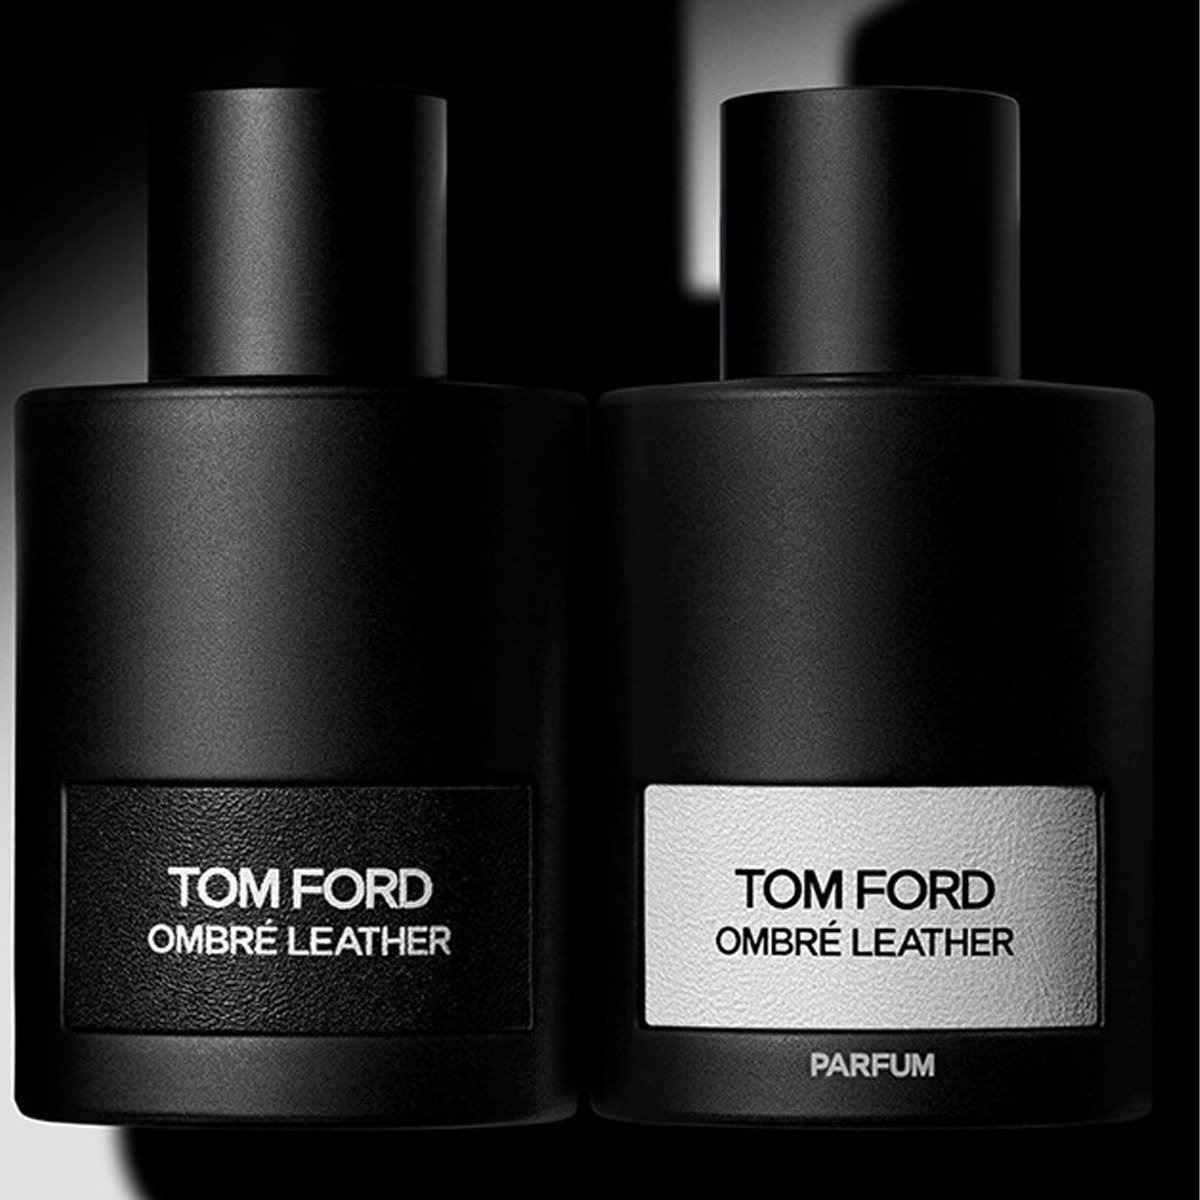 ombre leather parfum tom ford design